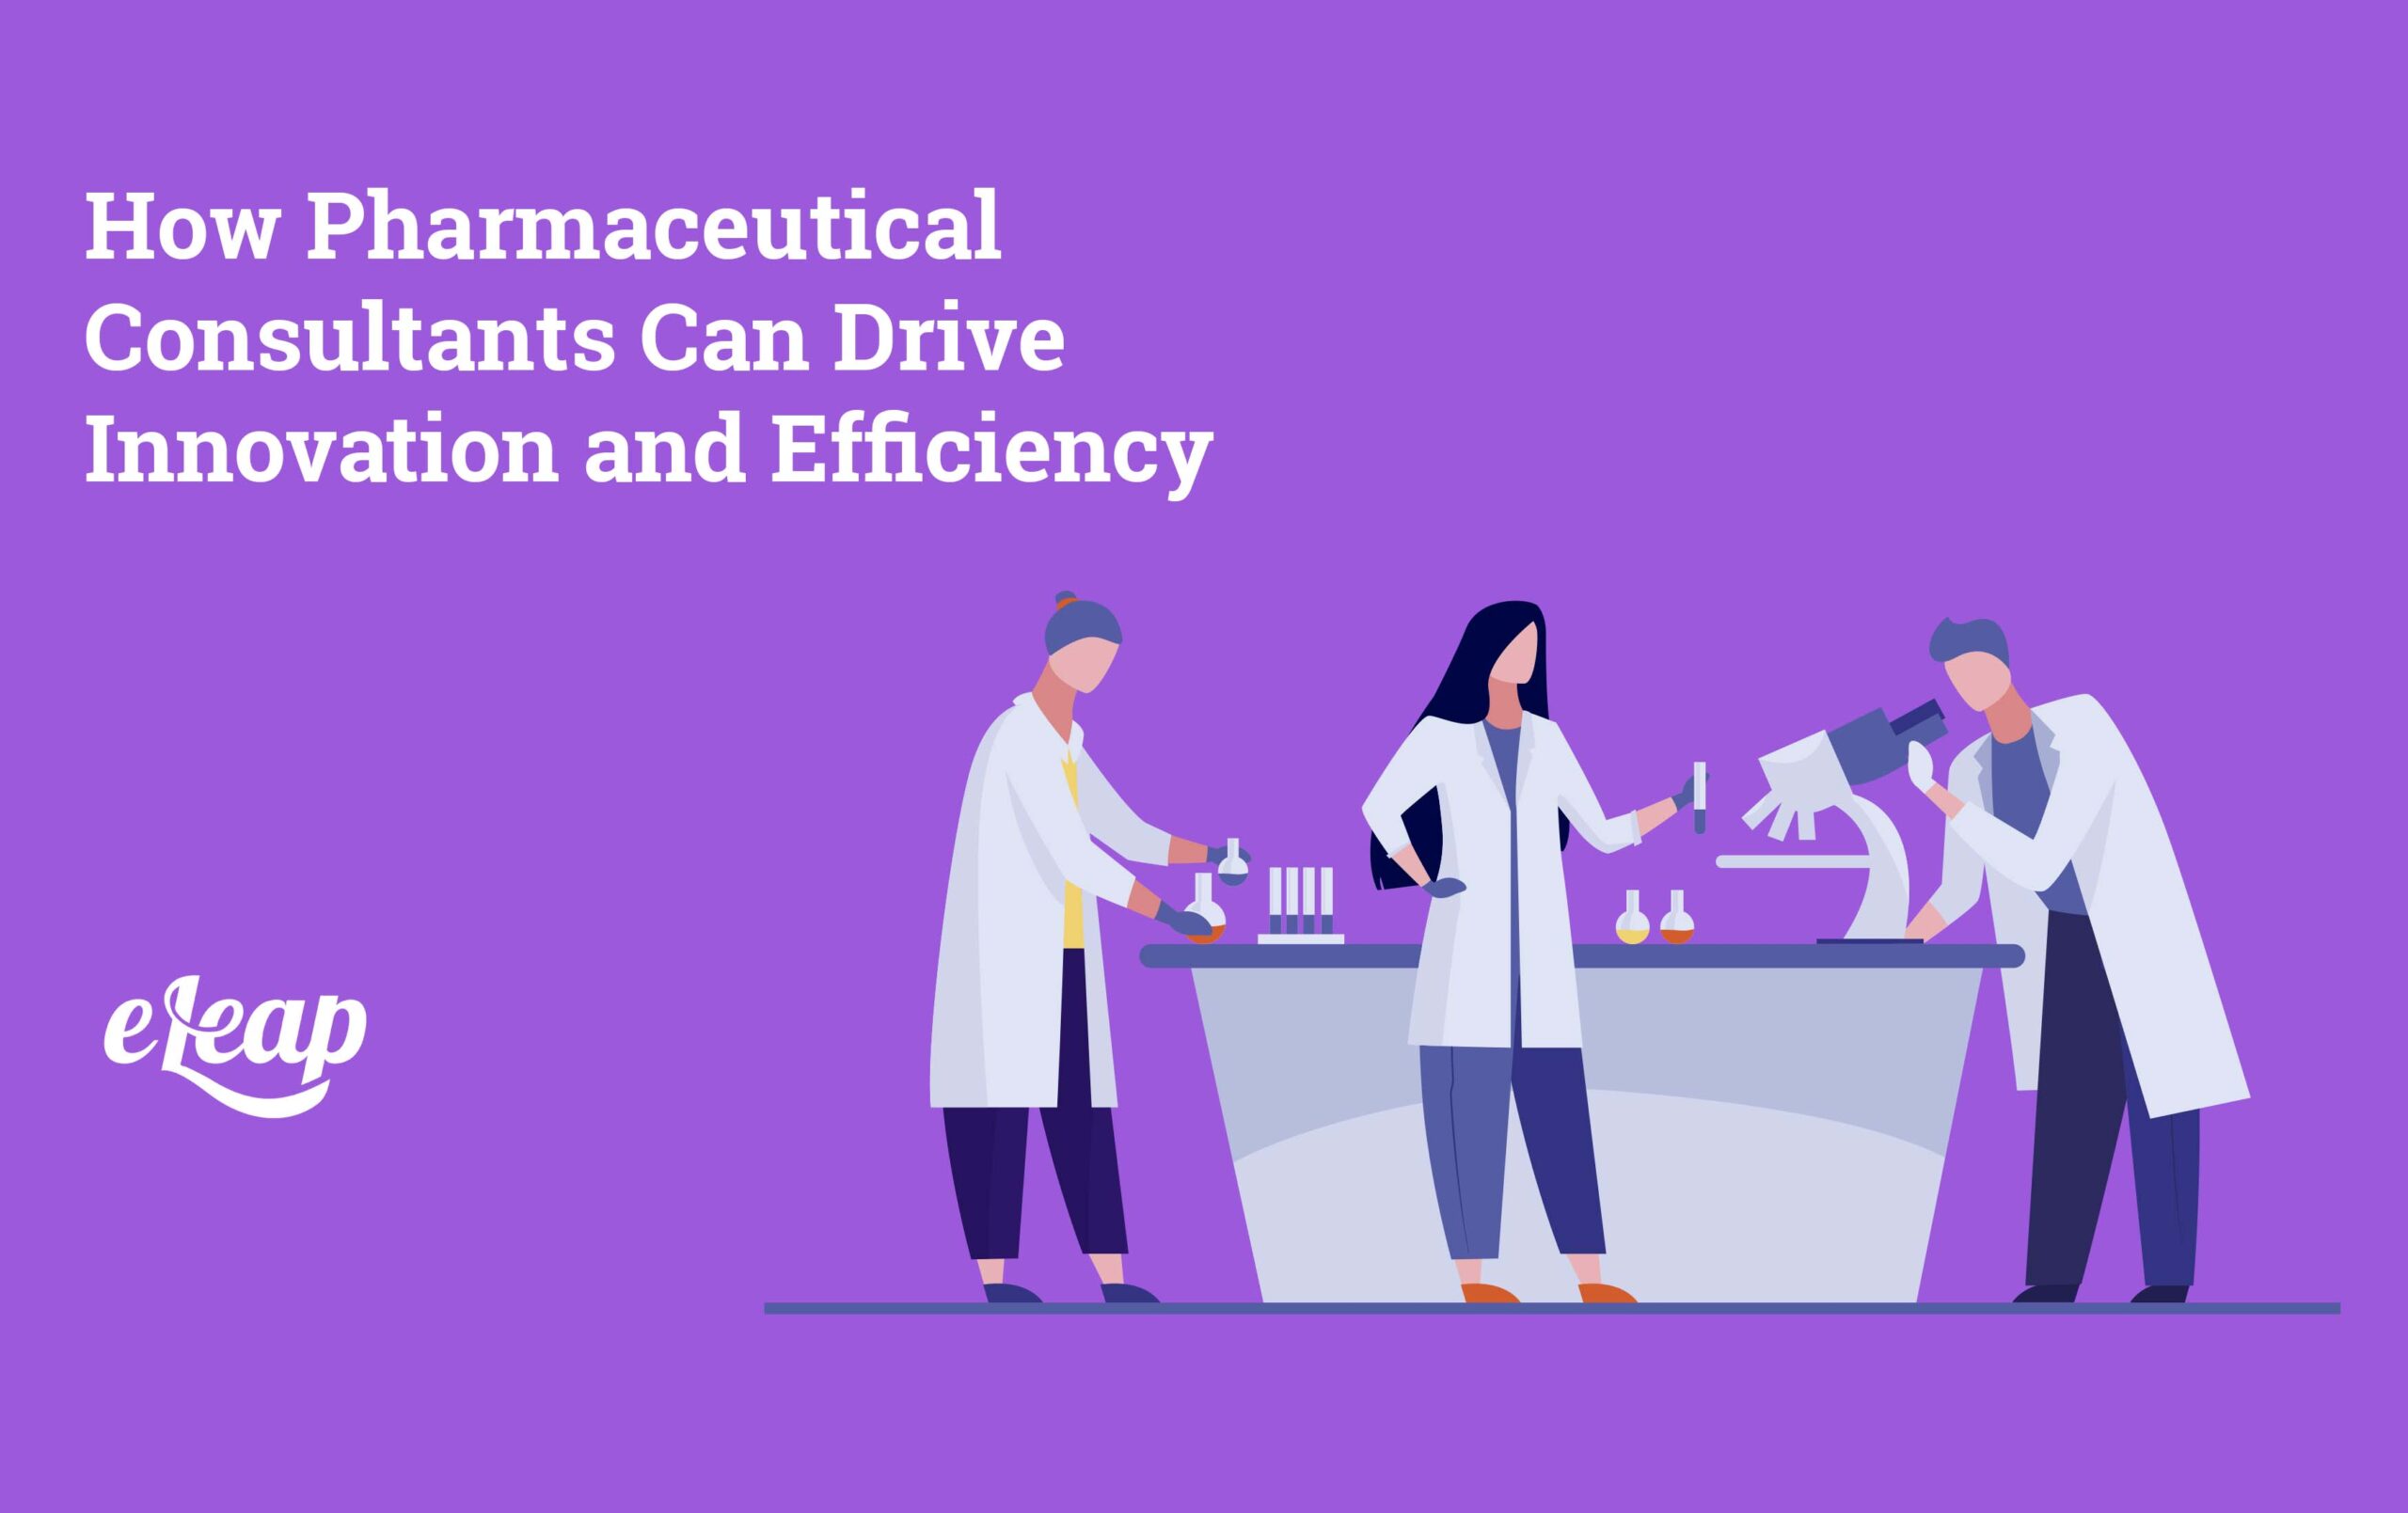 How Pharmaceutical Consultants Can Drive Innovation and Efficiency